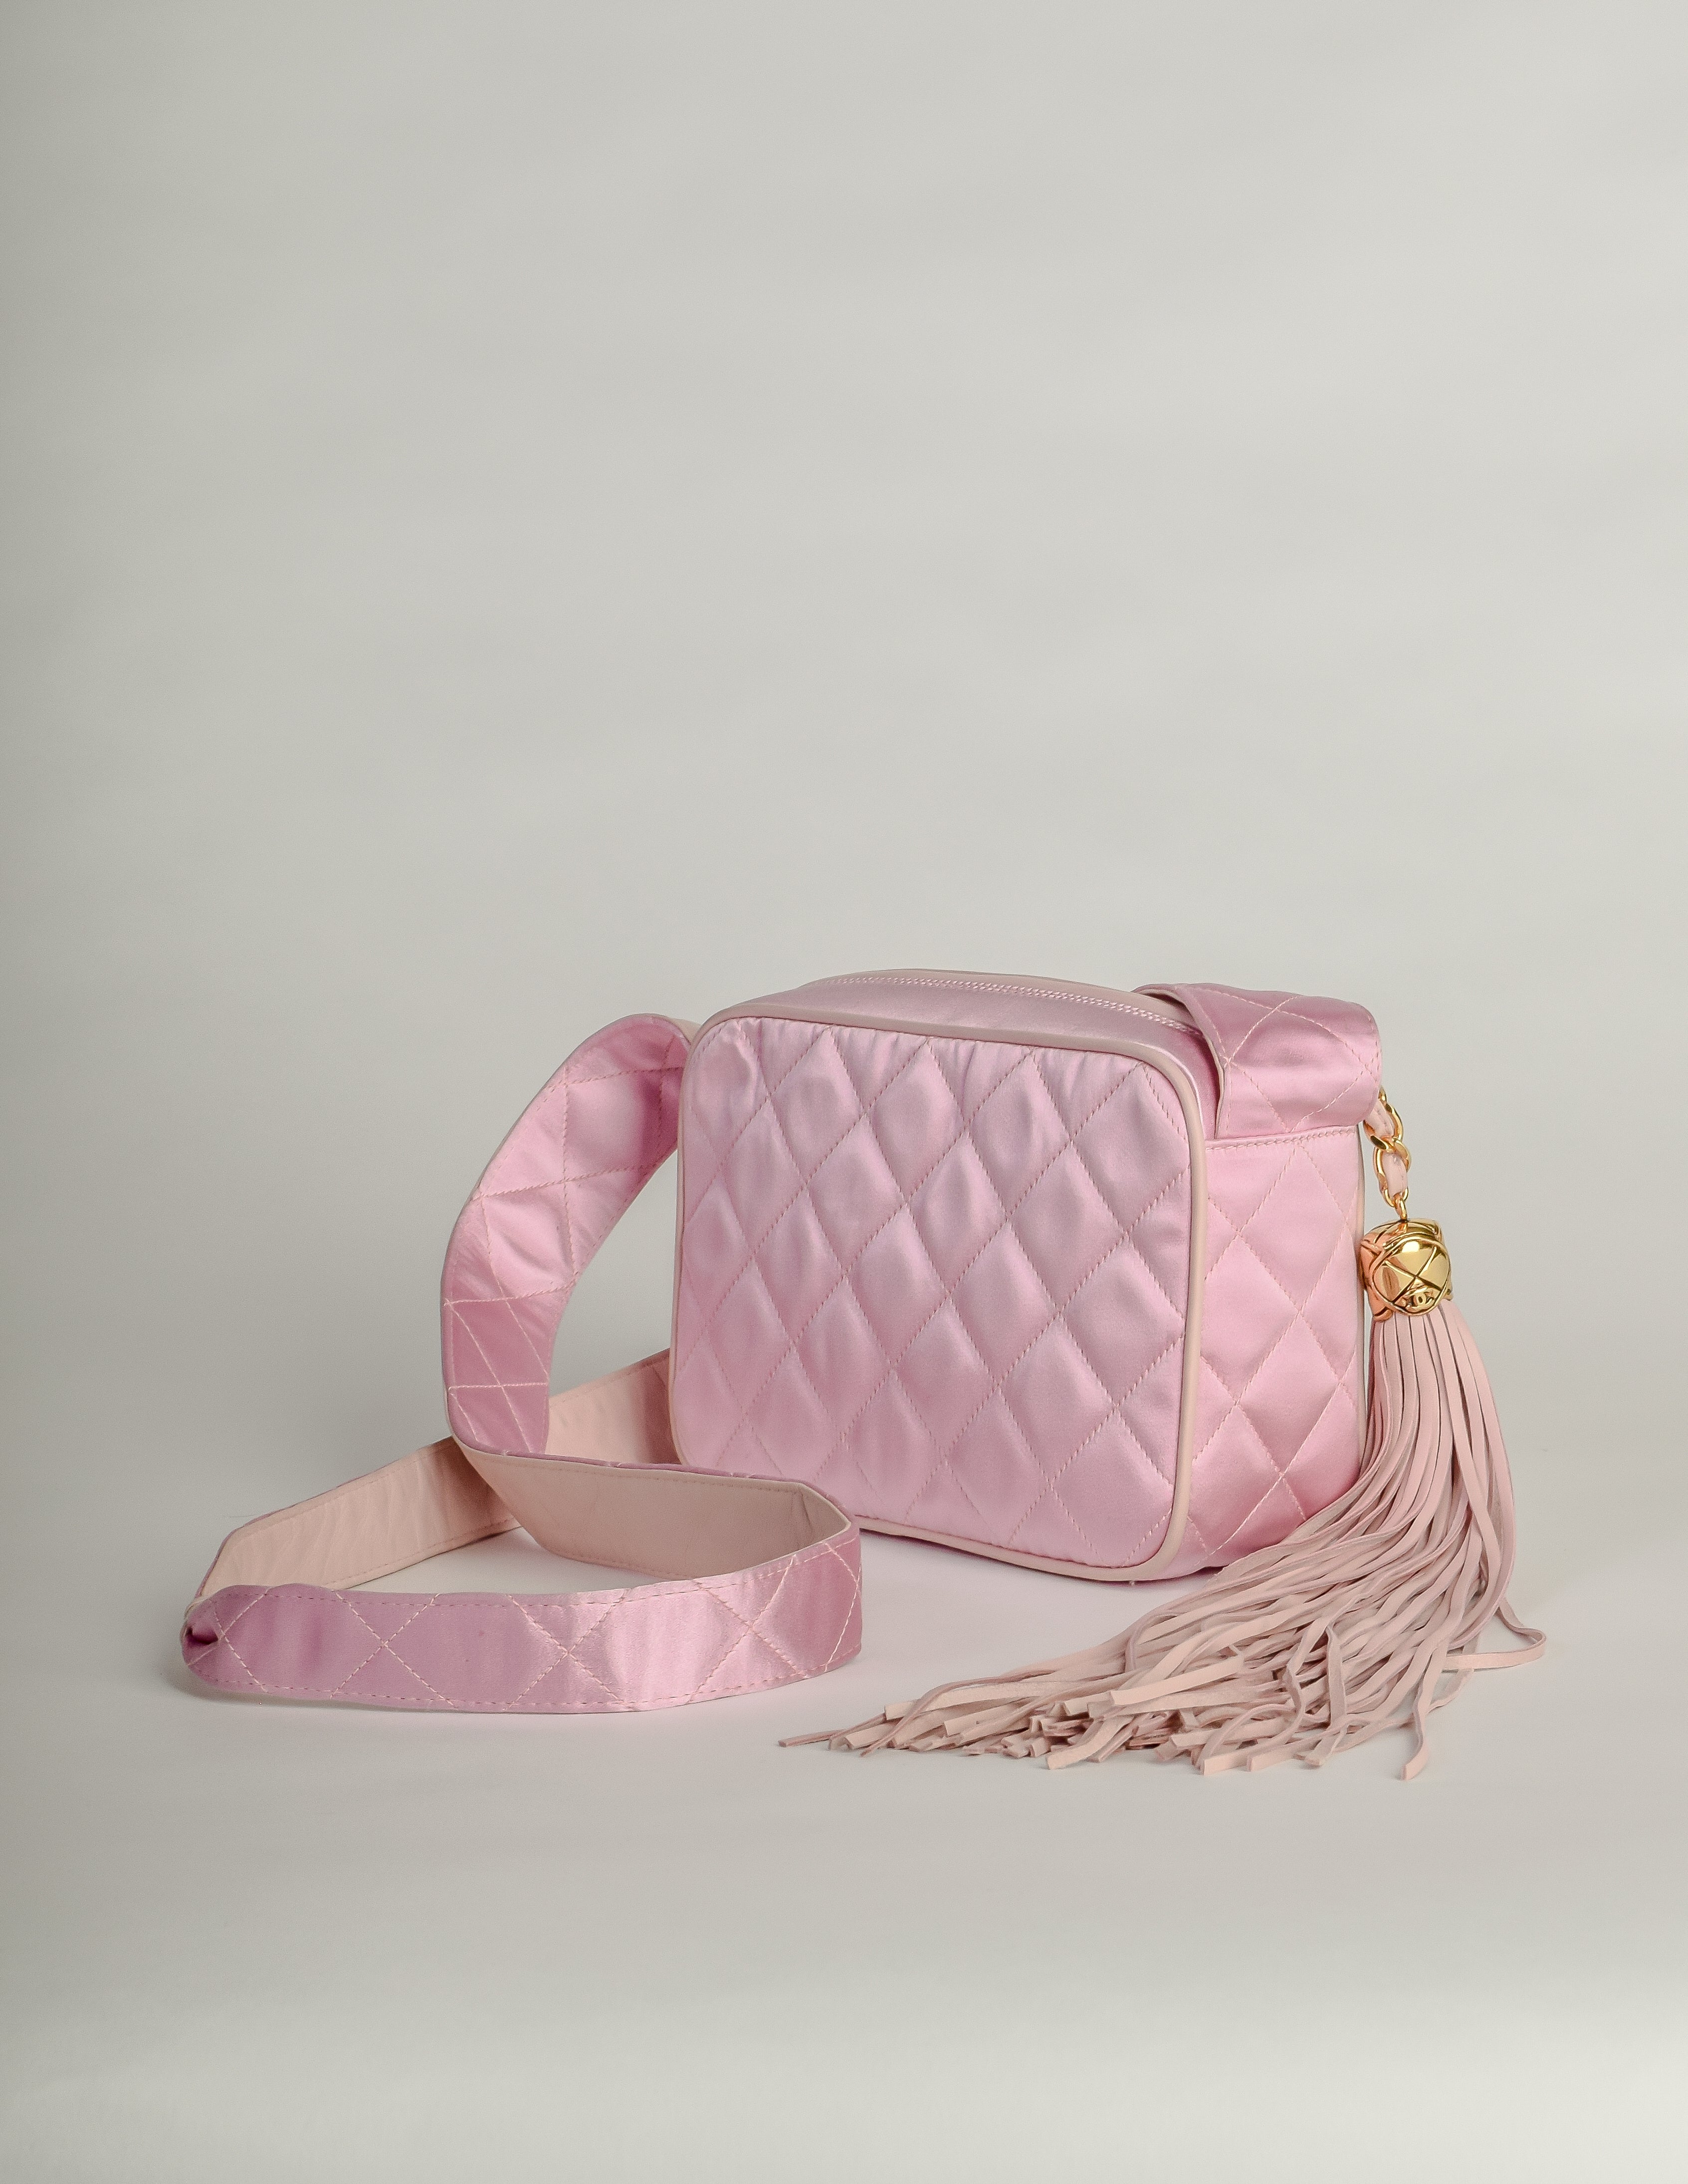 Chanel Vintage Quilted Baby Pink Satin Tassel Bag - from Amarcord ...